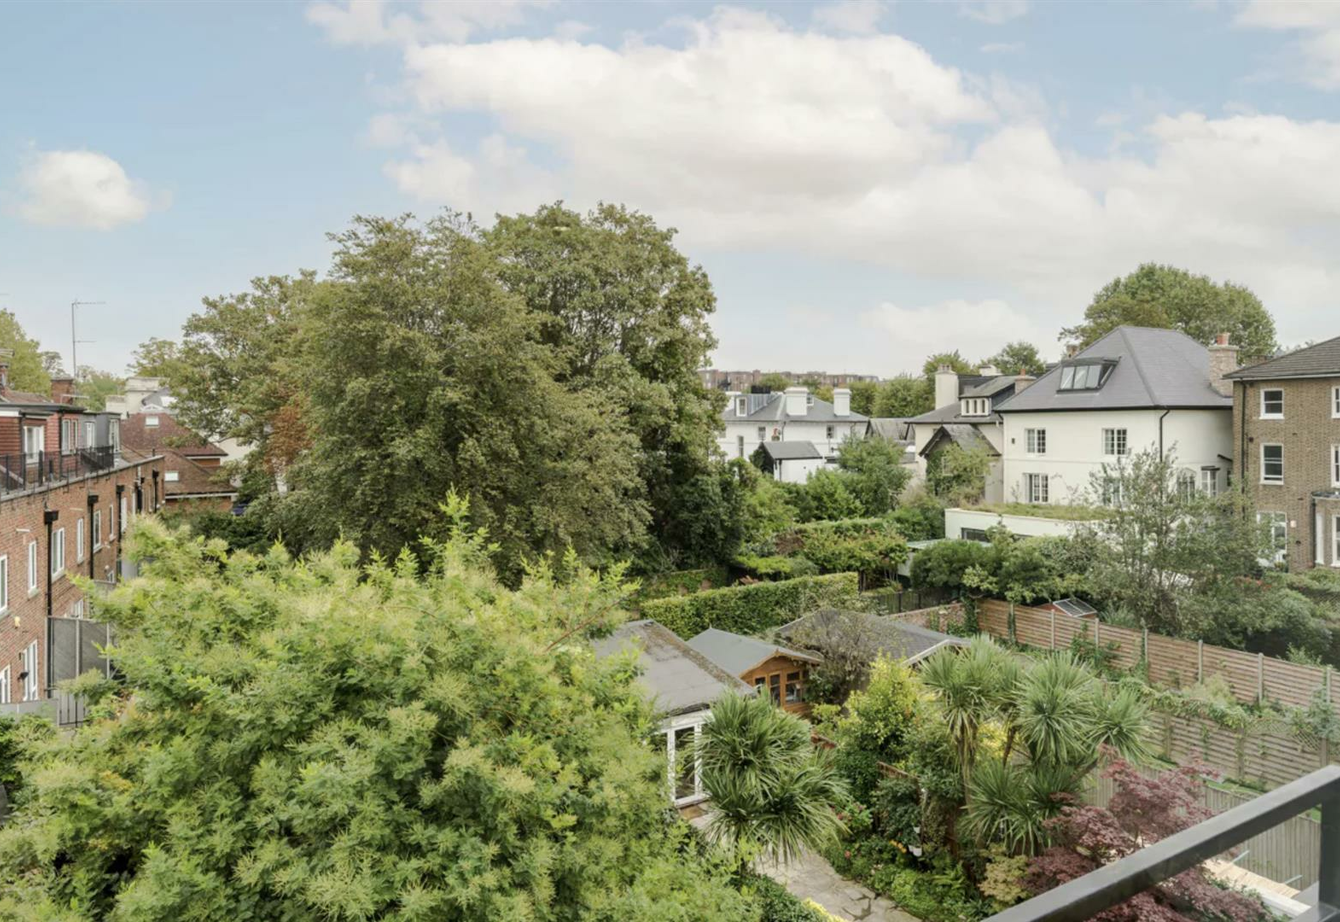 for-sale-abbey-road-london-410-view9